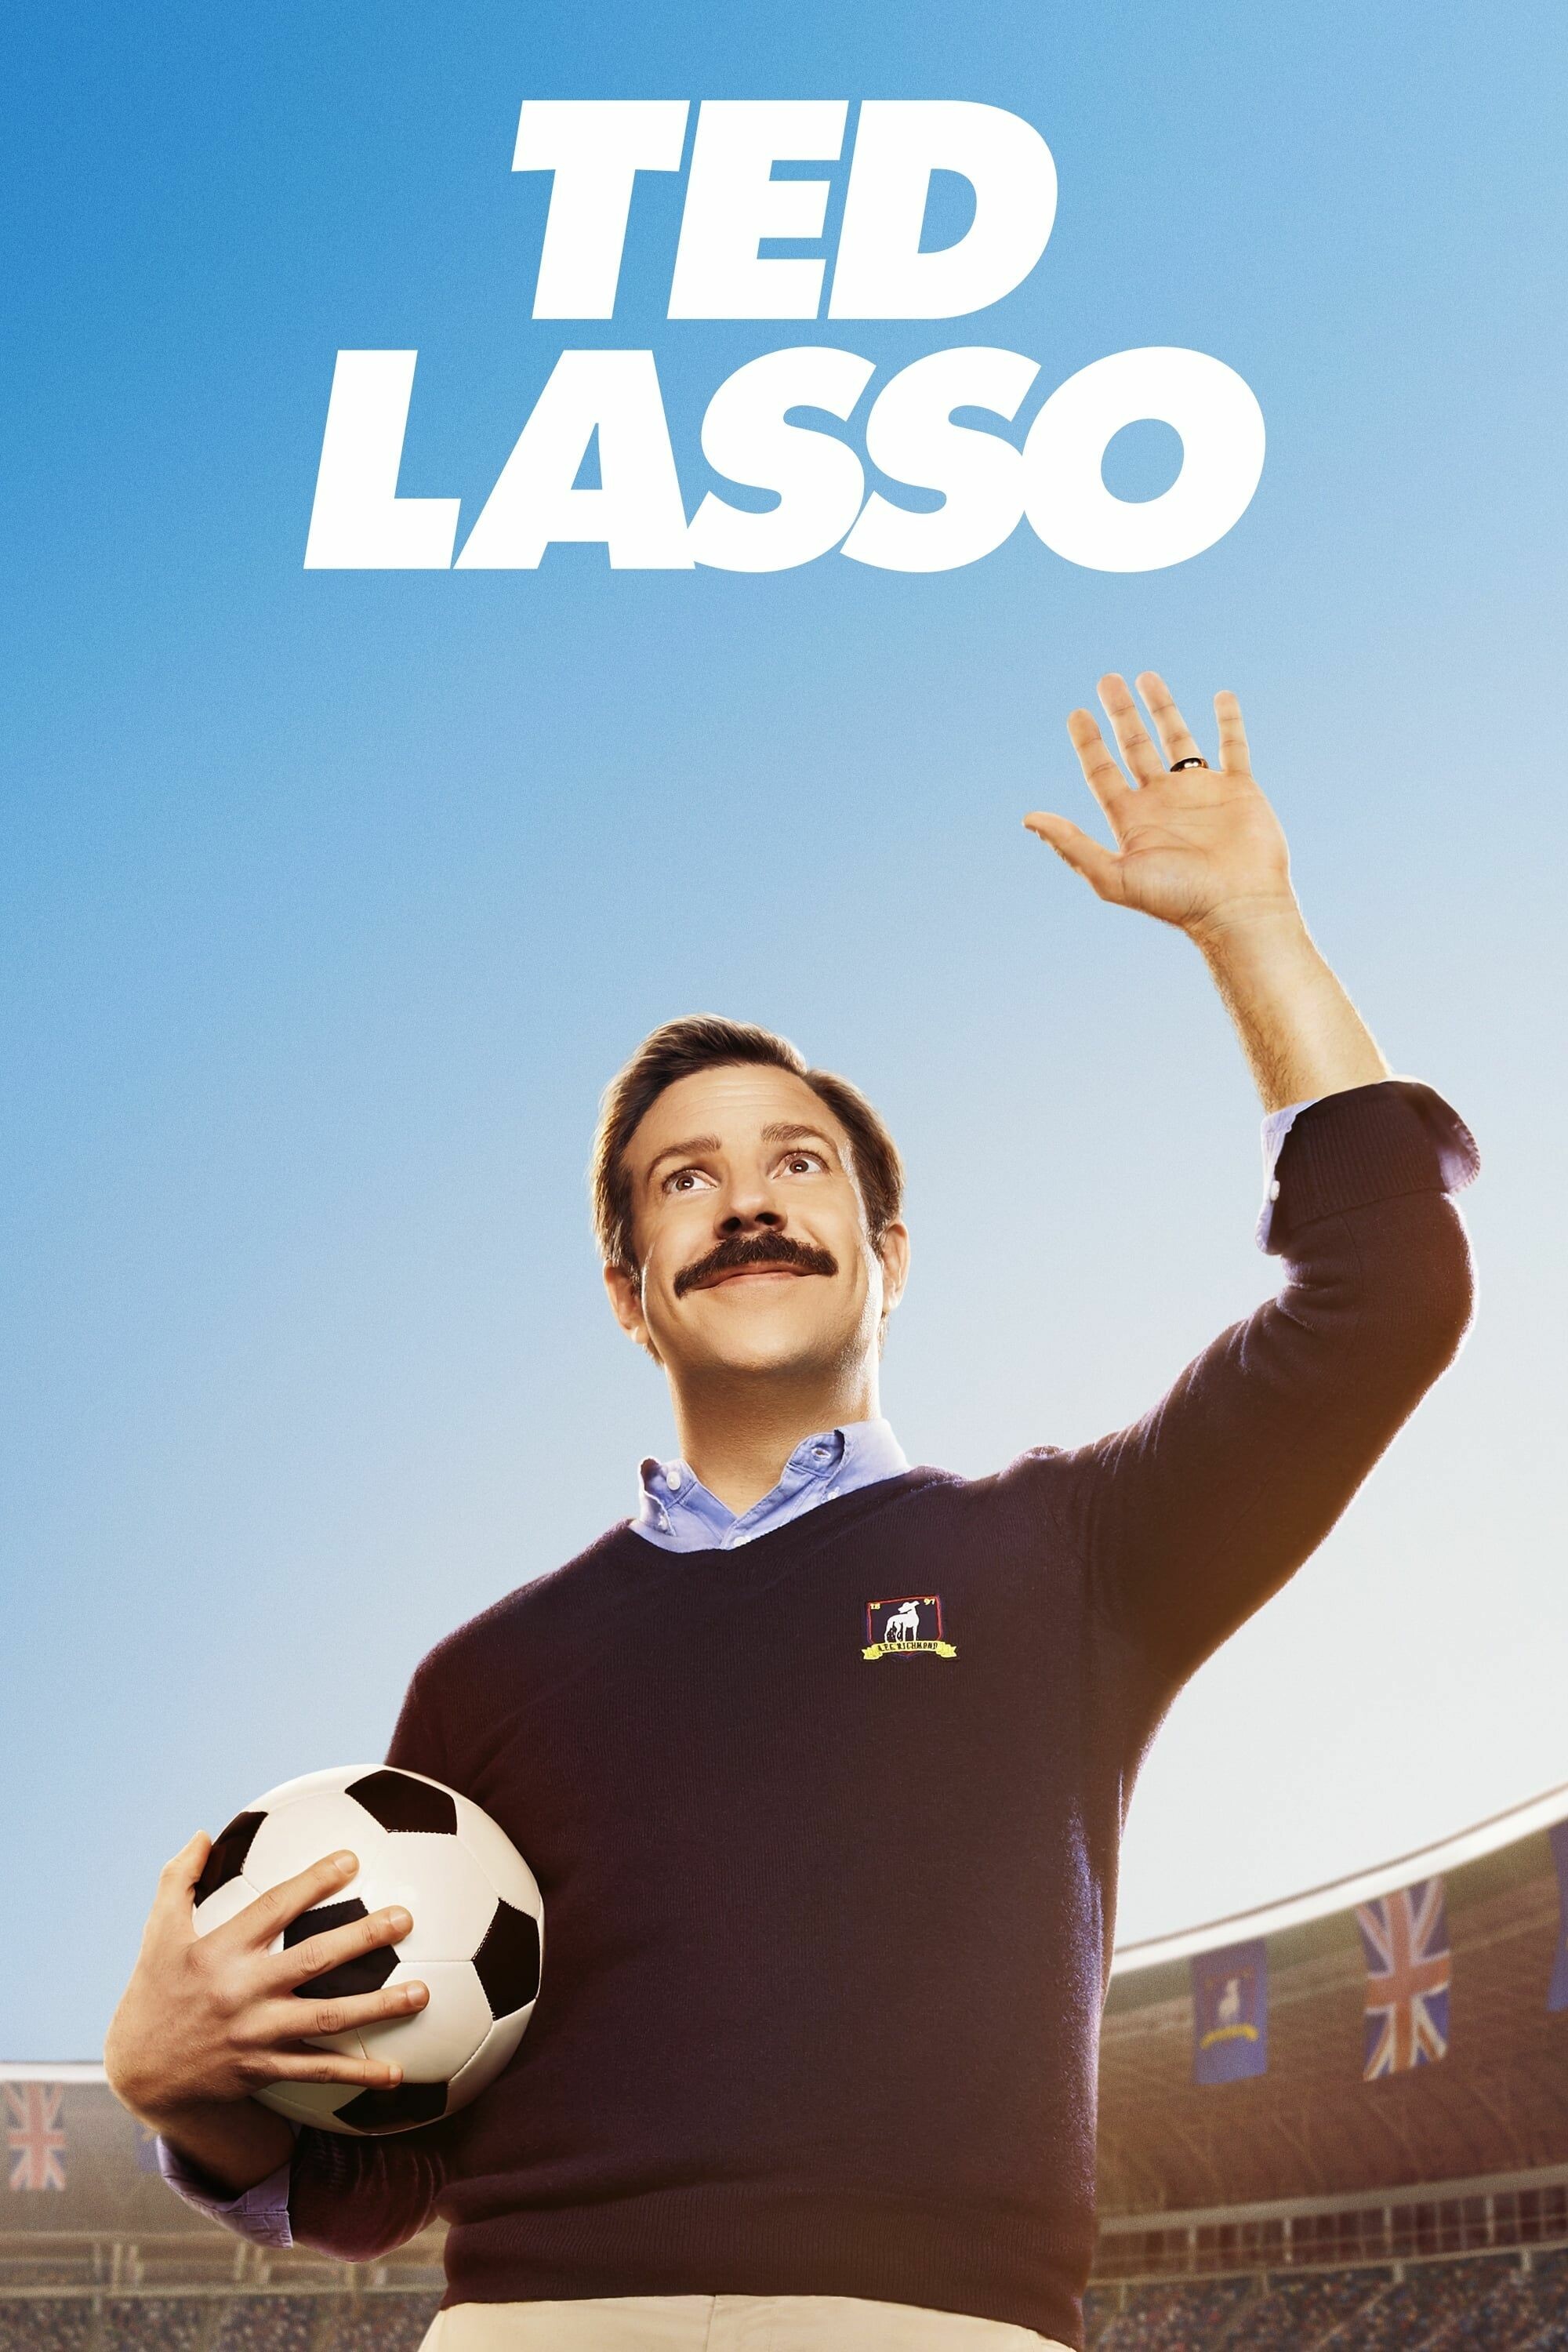 Ted Lasso: The first season of 10 episodes premiered on Apple TV+ on August 14, 2020. 2000x3000 HD Wallpaper.